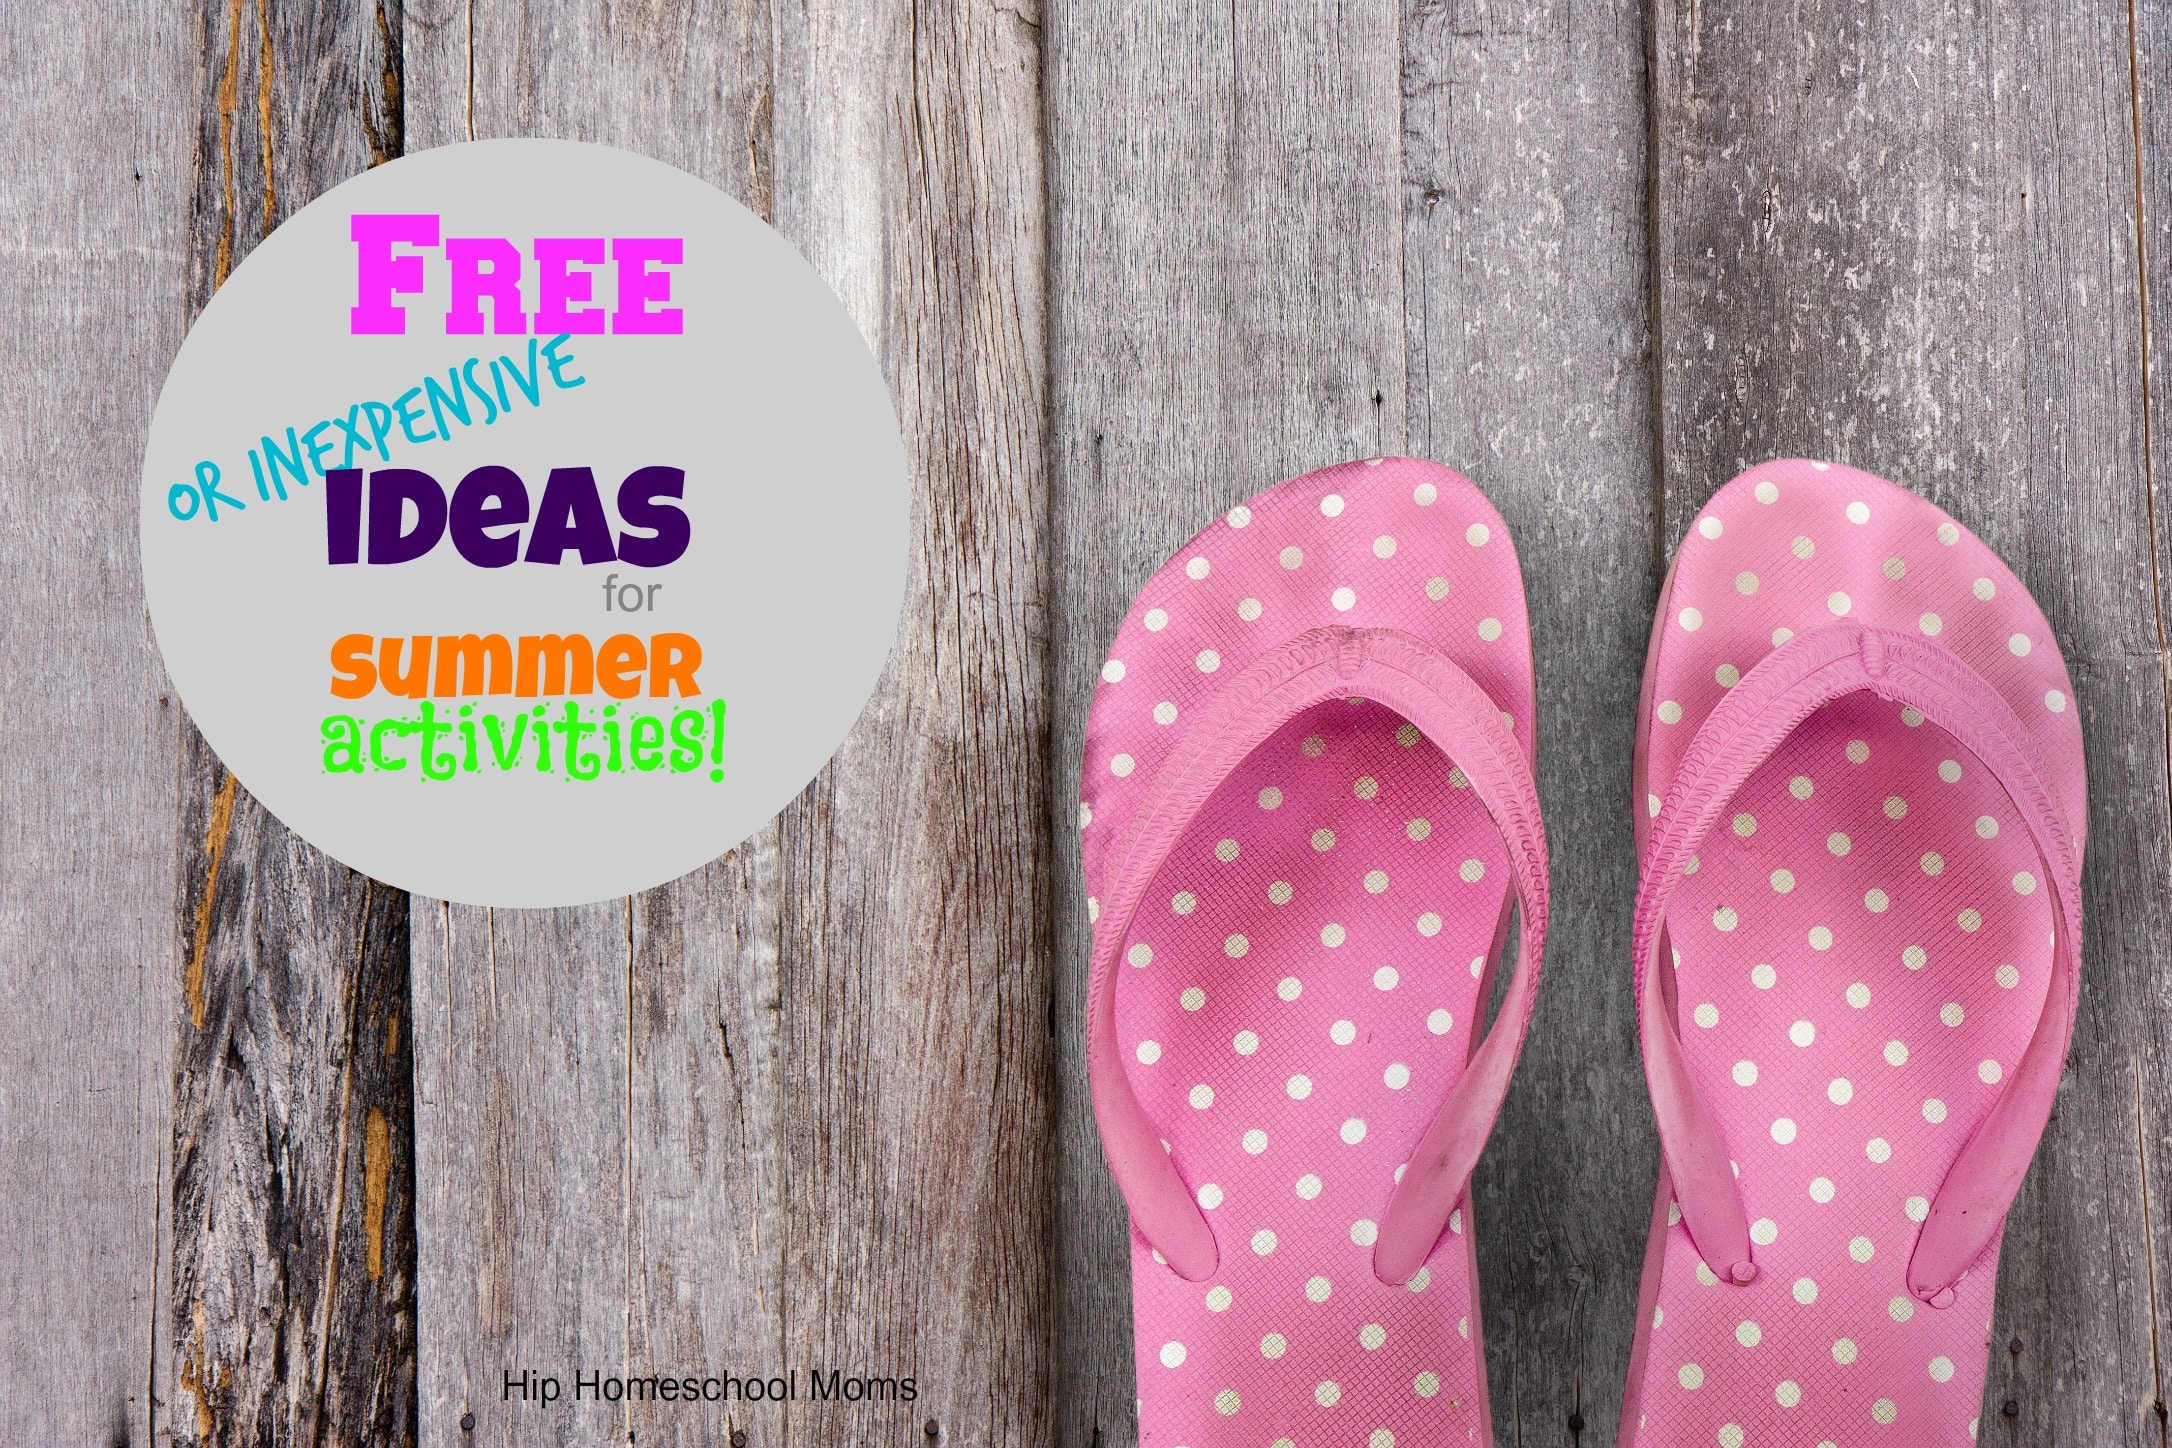 Free {or inexpensive} ideas for summer activities!